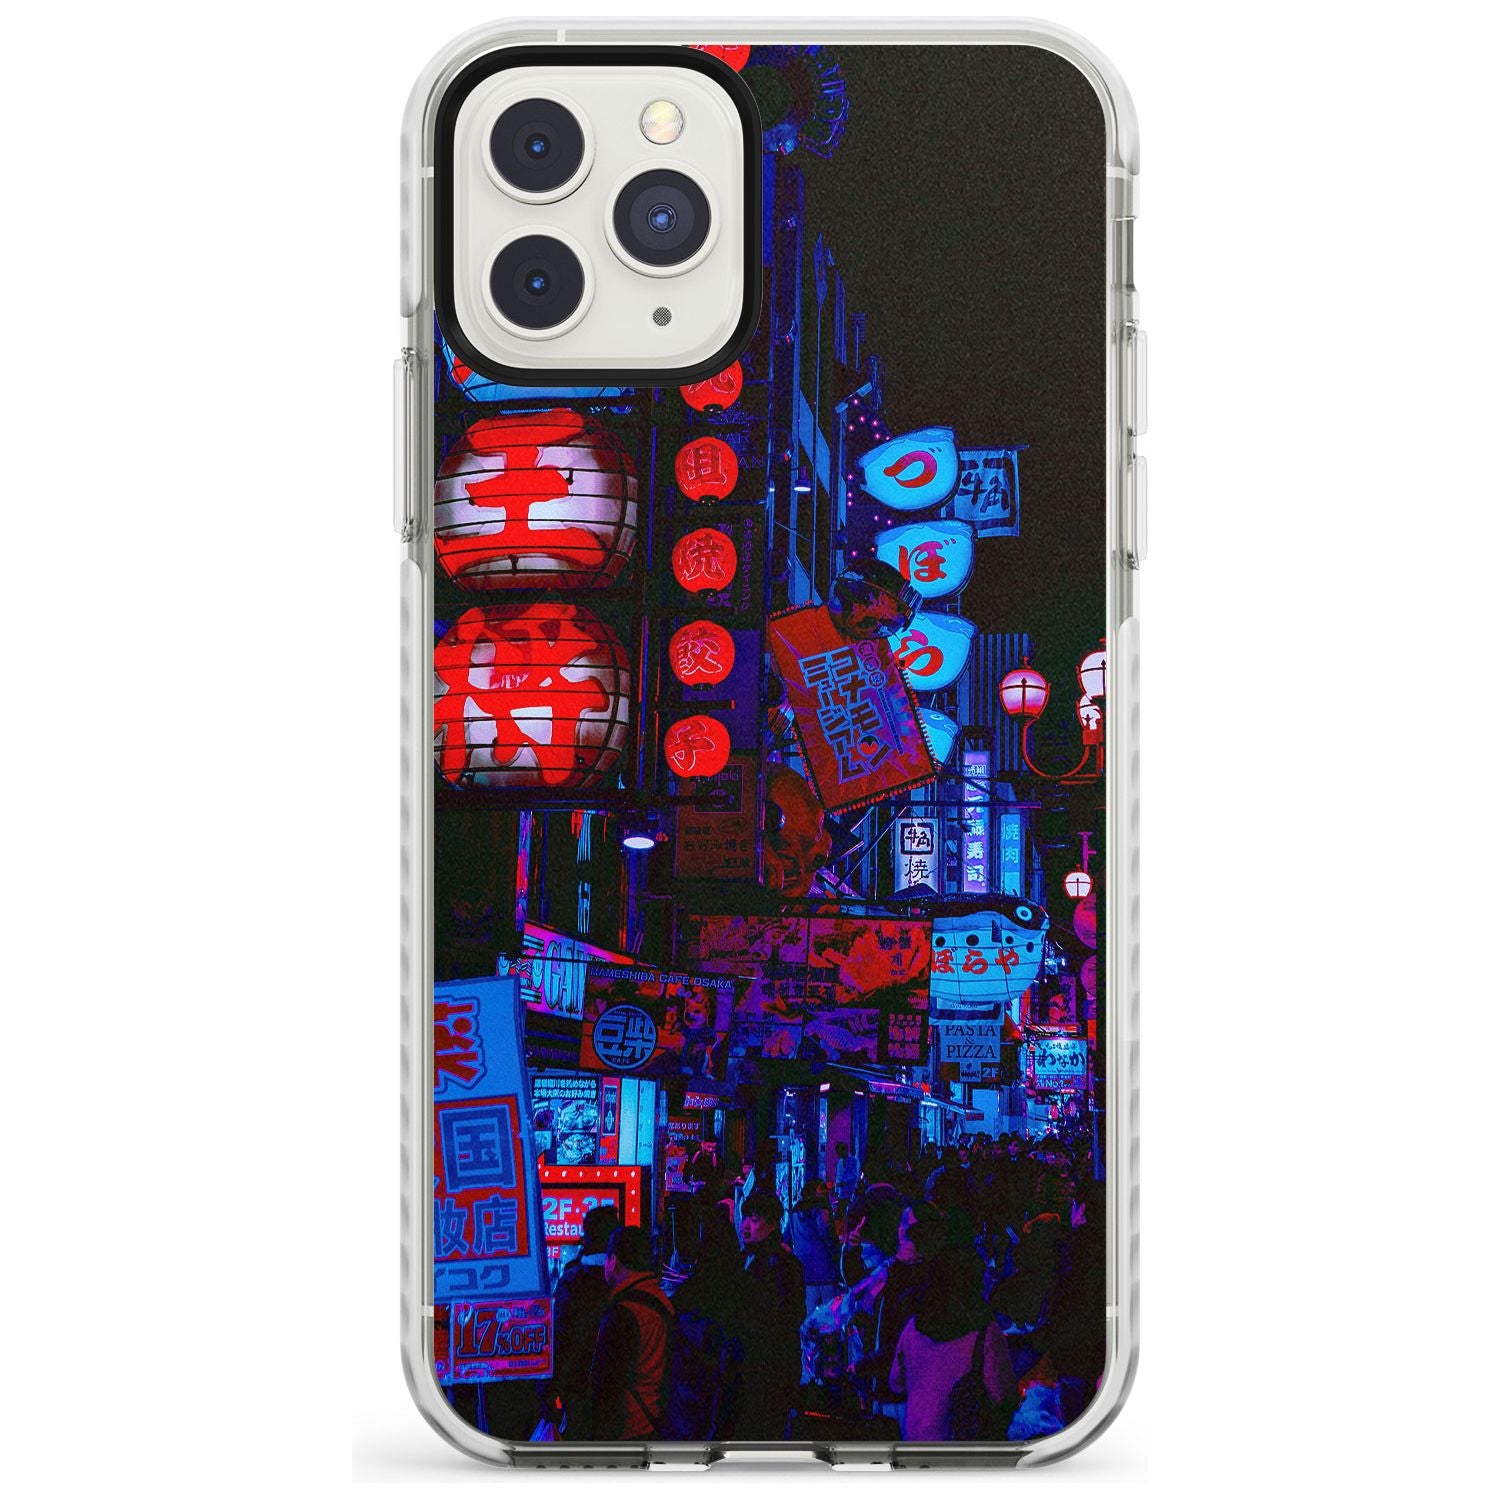 Red & Turquoise - Neon Cities Photographs Impact Phone Case for iPhone 11 Pro Max